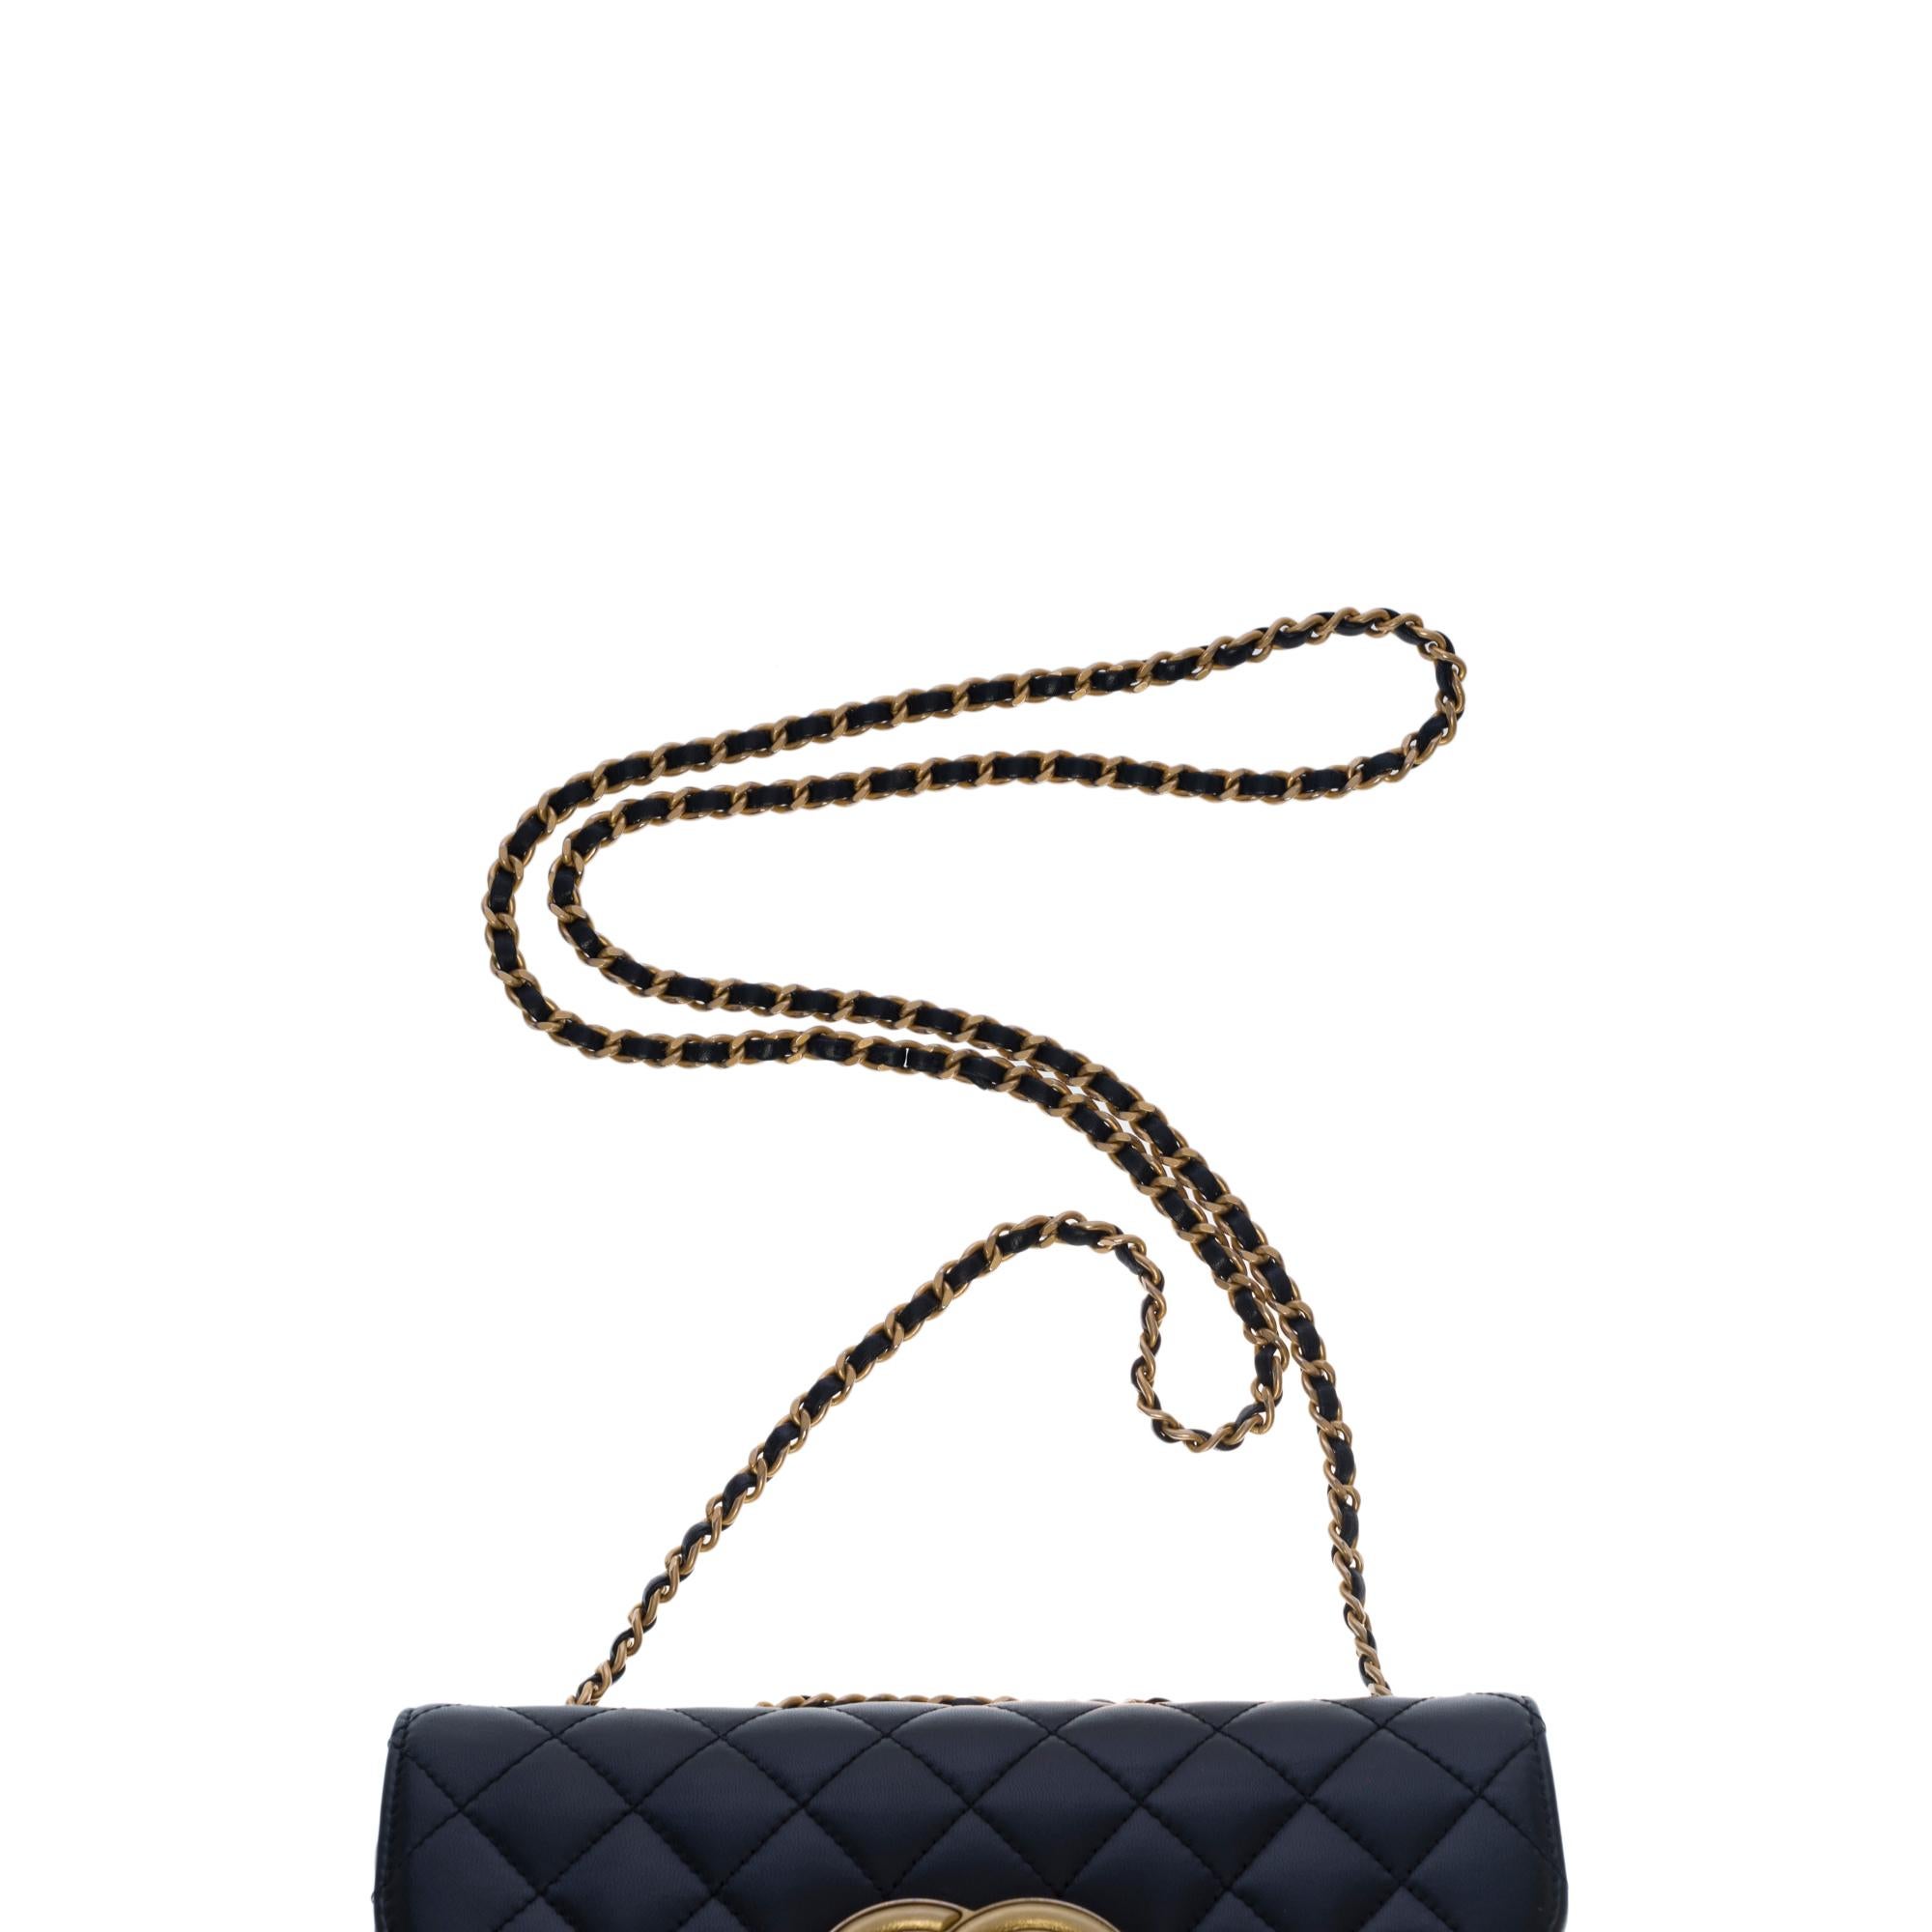 Chanel Classic double flap shoulder bag in black and gold quilted leather , GHW 1